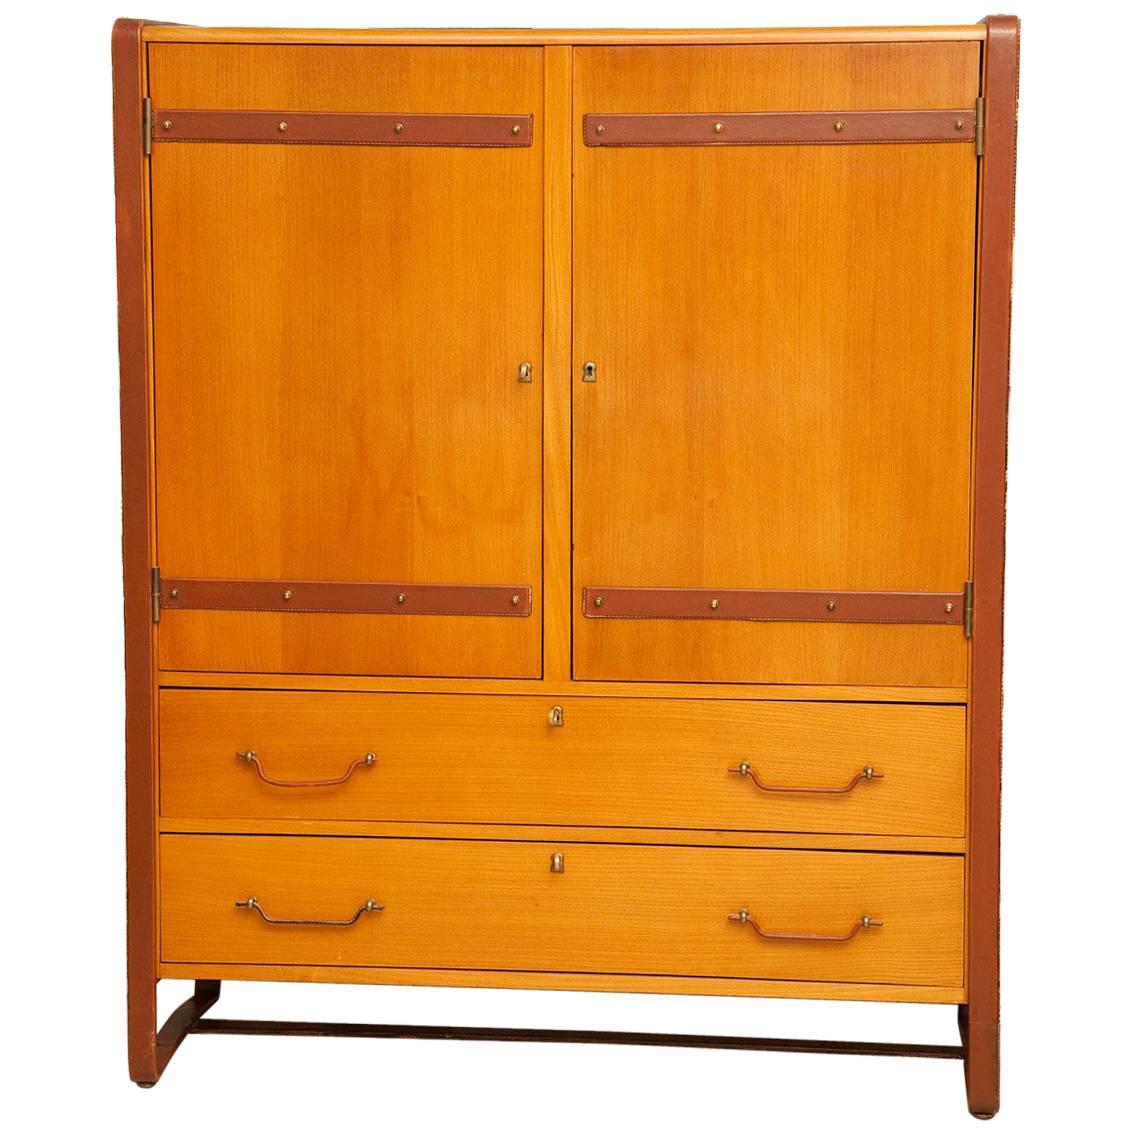 Large Cherrywood and Leather Cabinet by Jacques Adnet, circa 1950